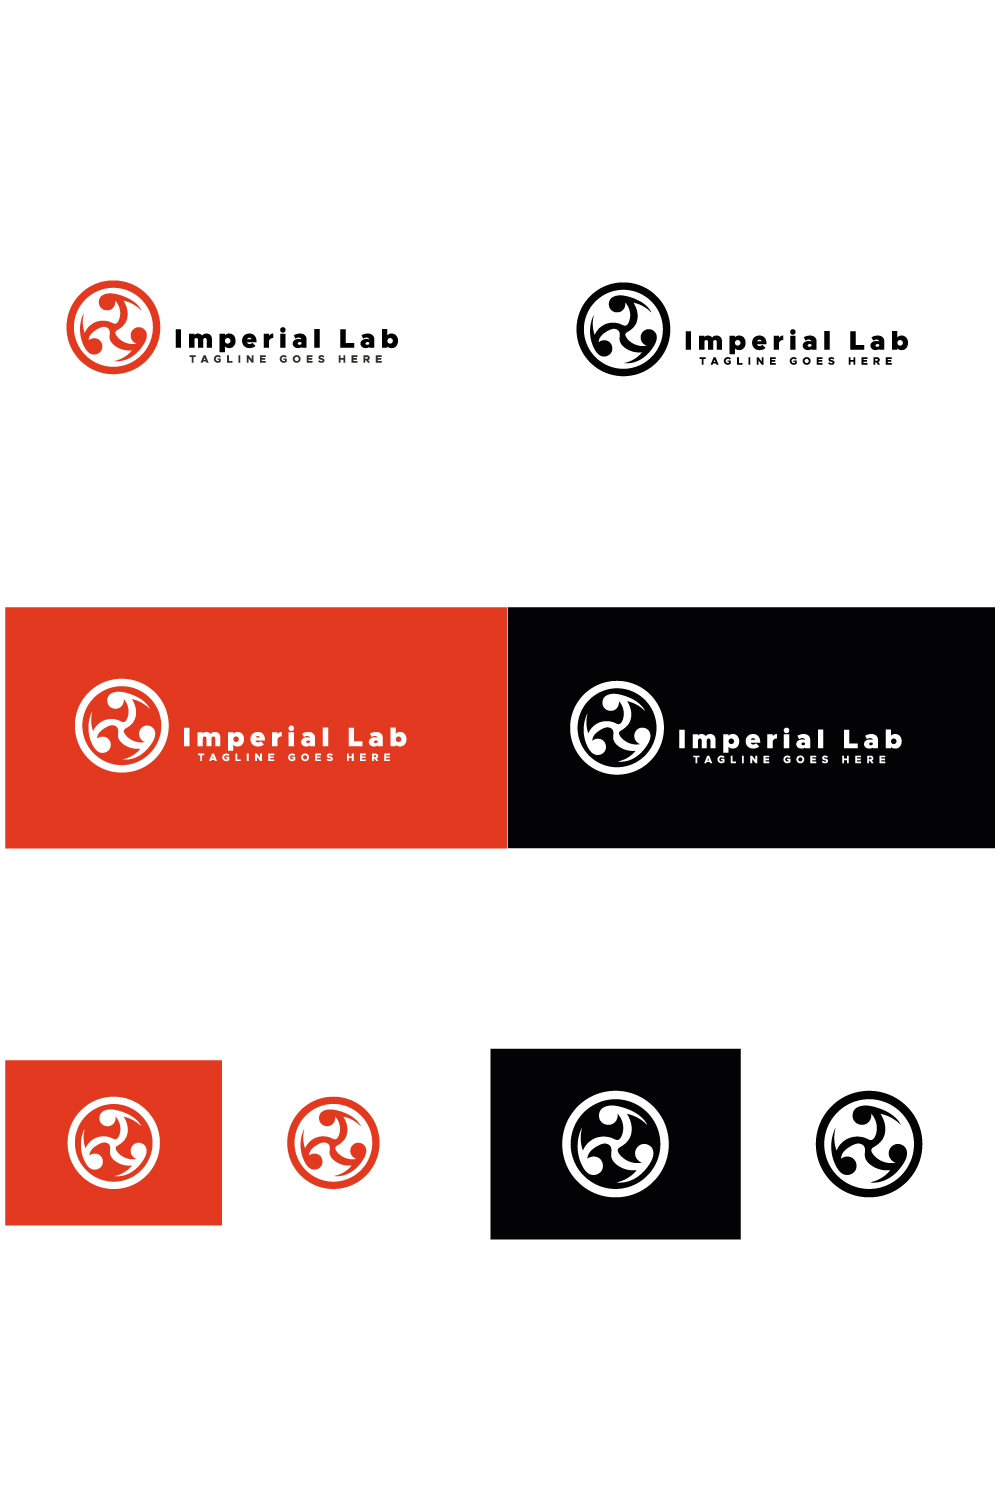 Imperial Lab Professional Logo Design Template Only 12$ pinterest image.